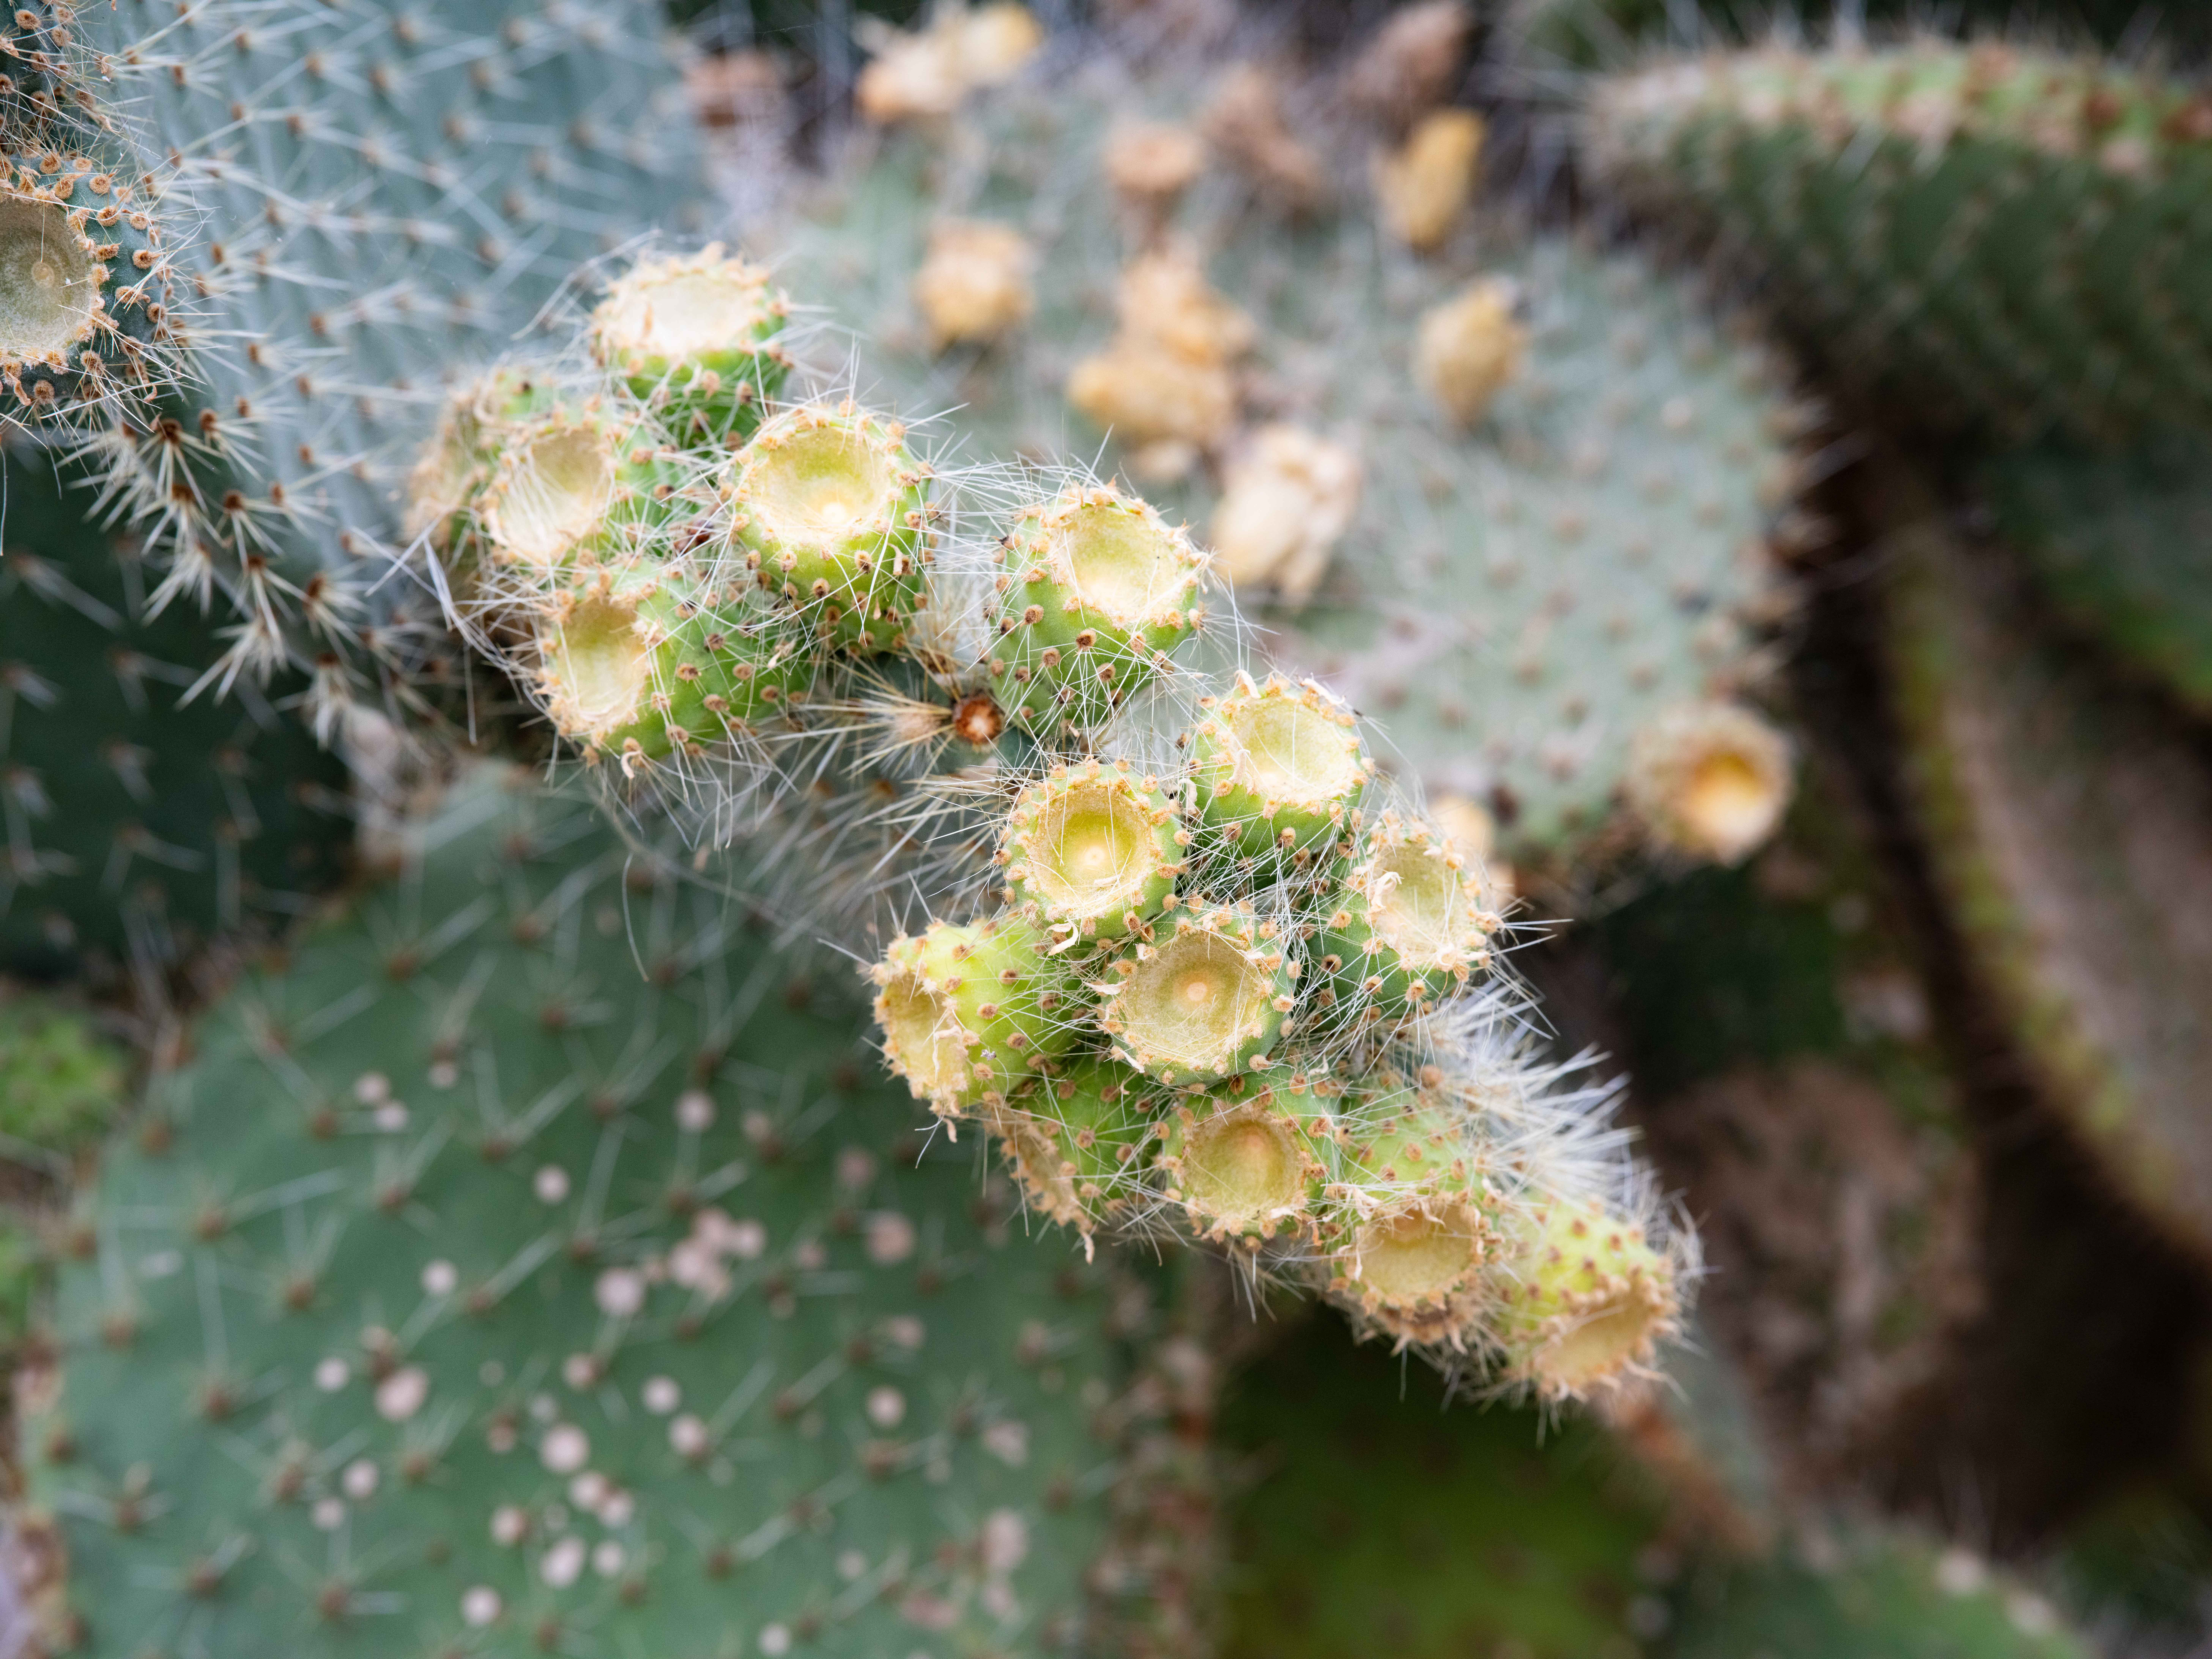 A photograph of a cactus leaf with numerous cactus flowers